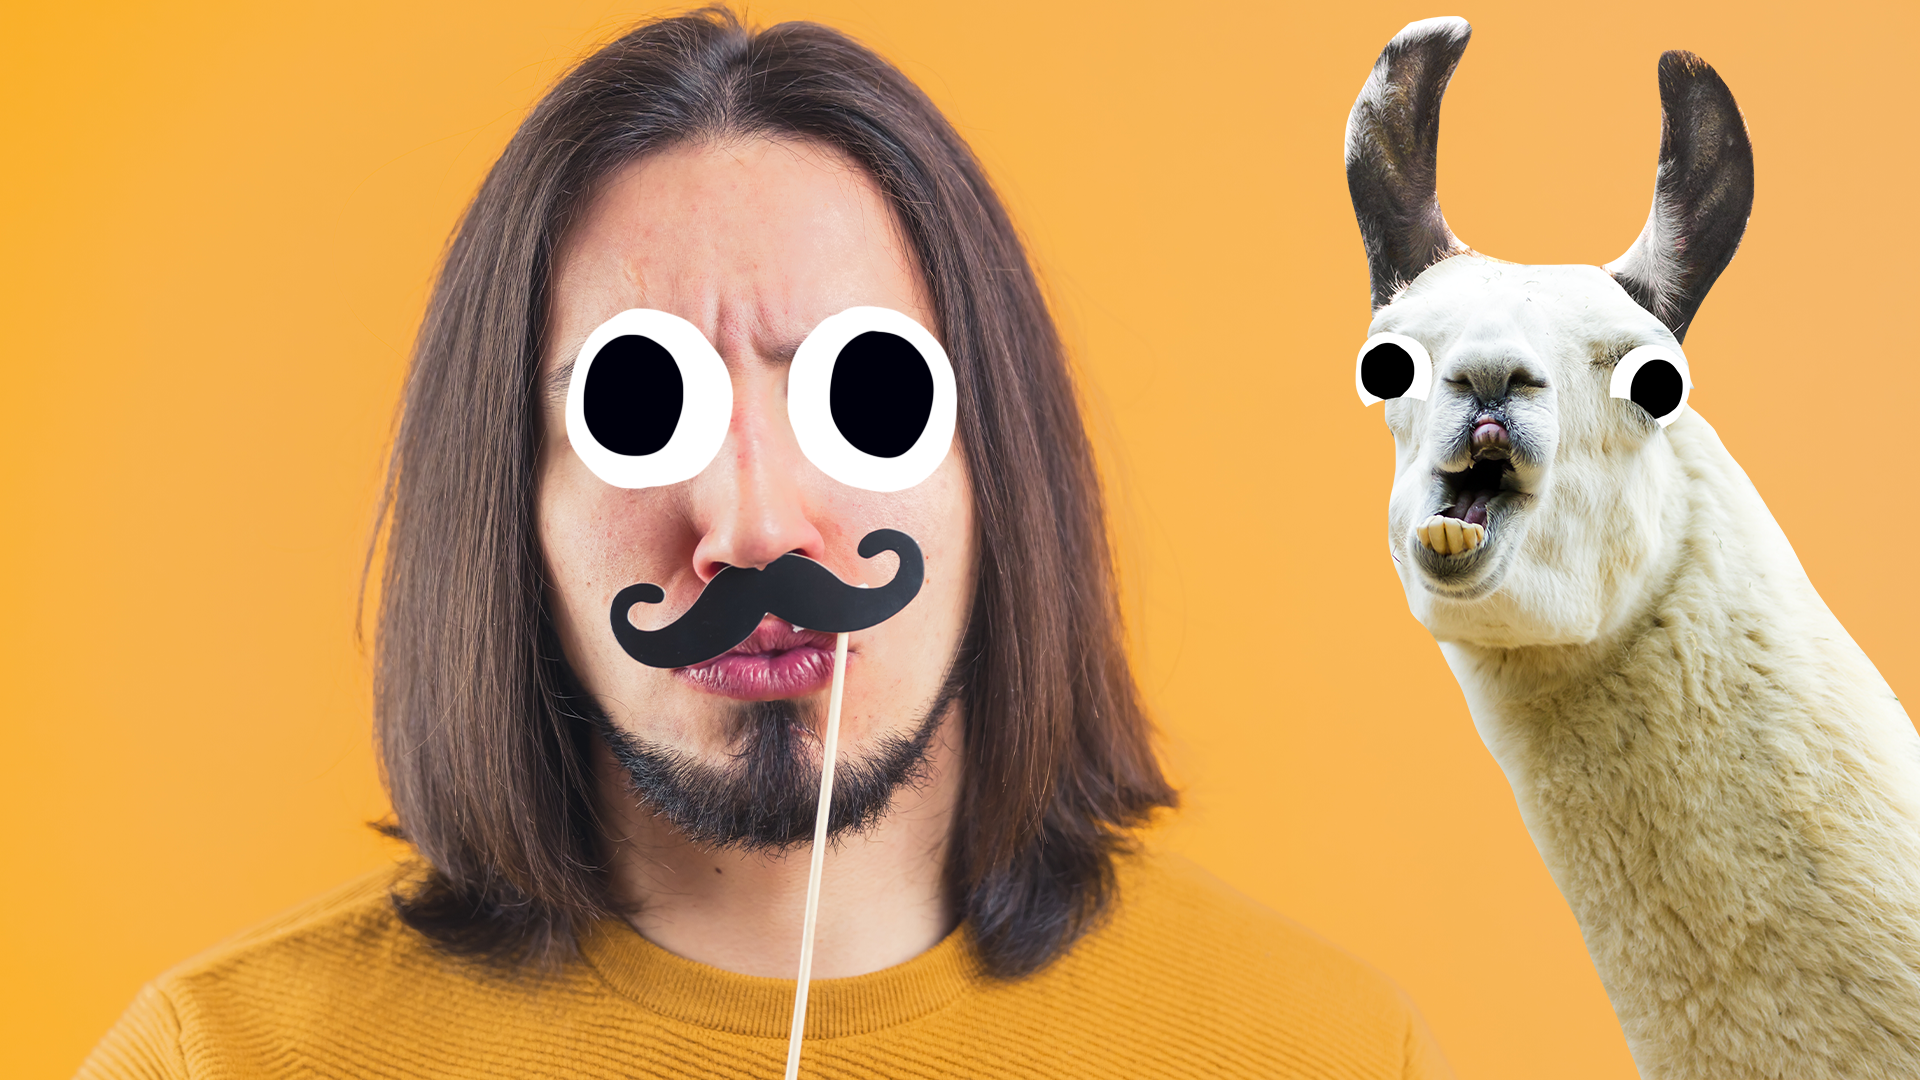 Man with fake moustache and derpy llama